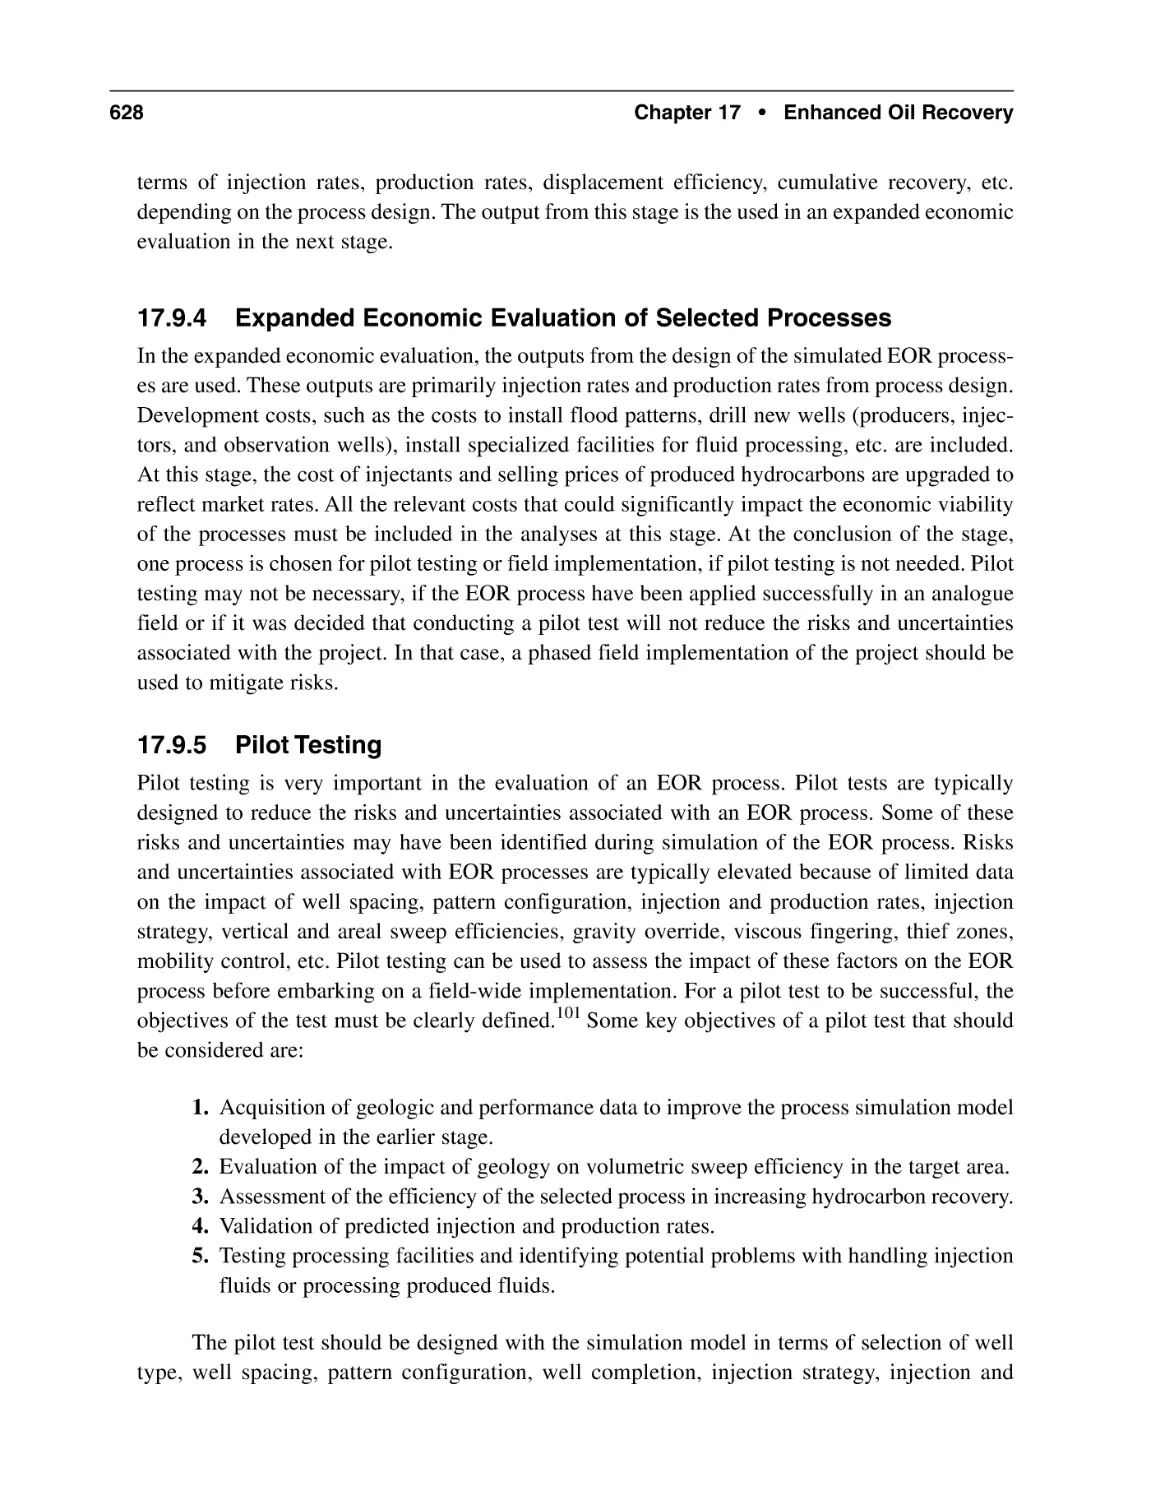 17.9.4 Expanded Economic Evaluation of Selected Processes
17.9.5 Pilot Testing